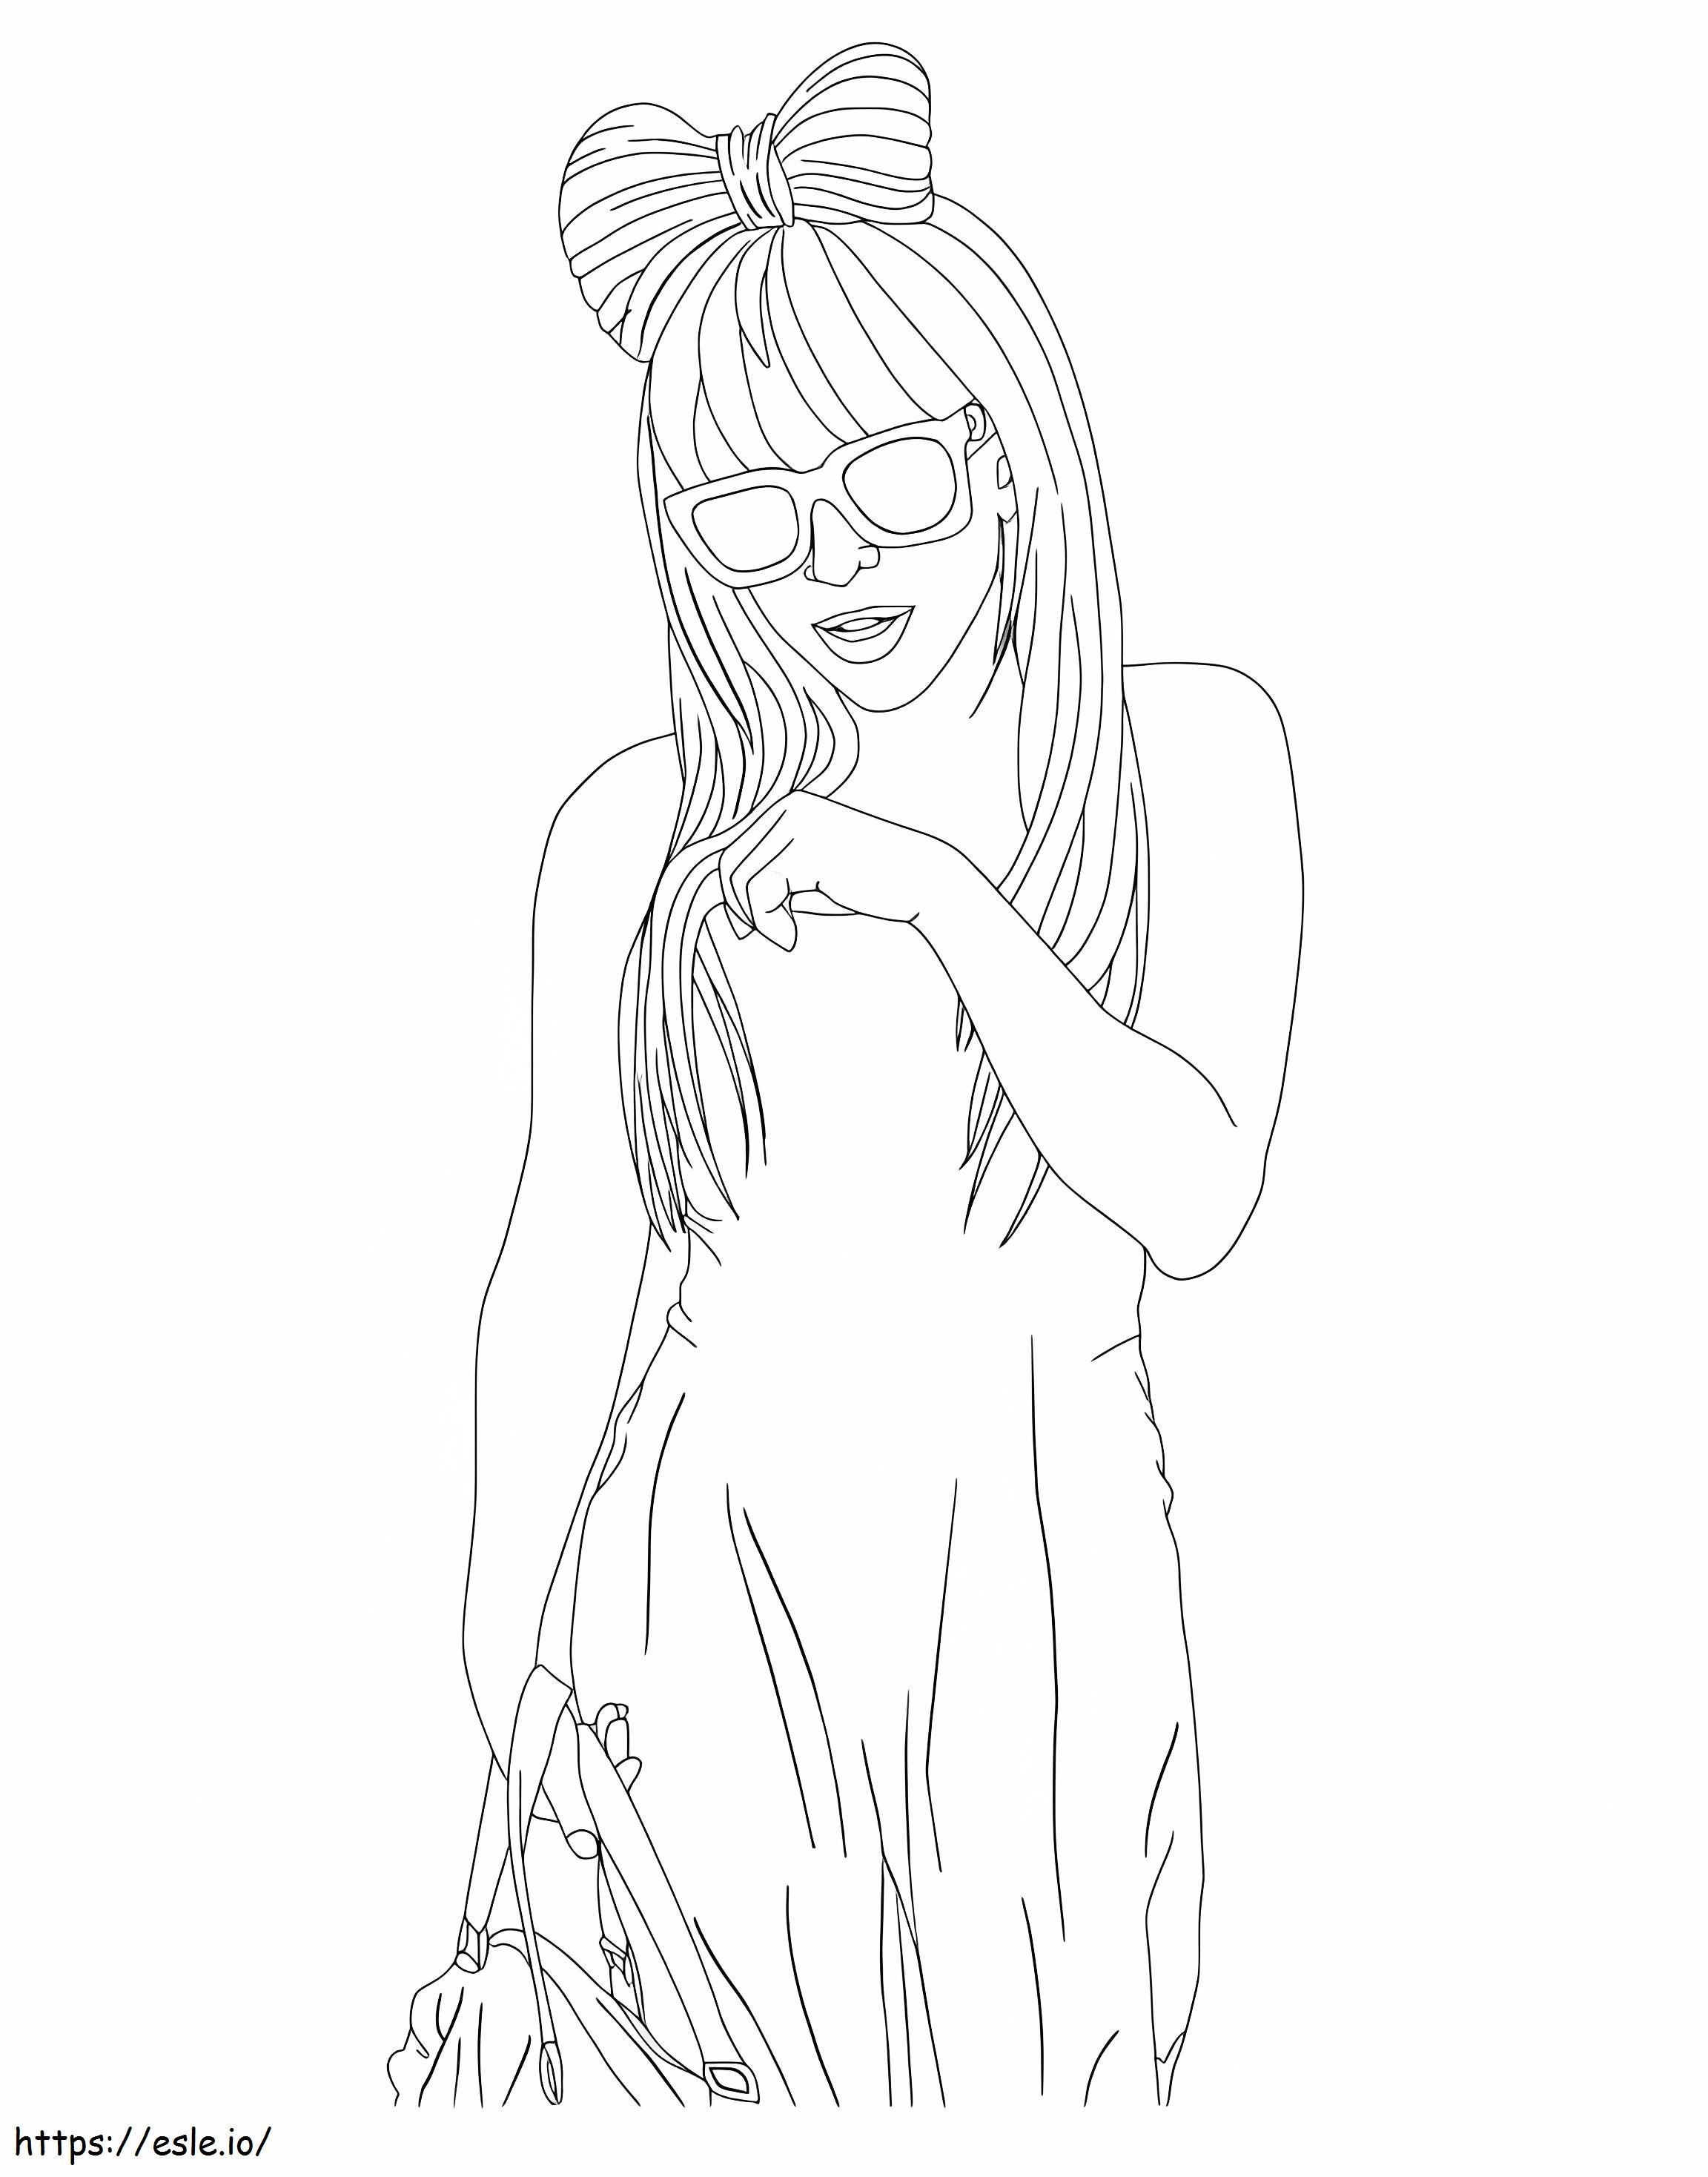 Lady Gaga With Sunglasses coloring page